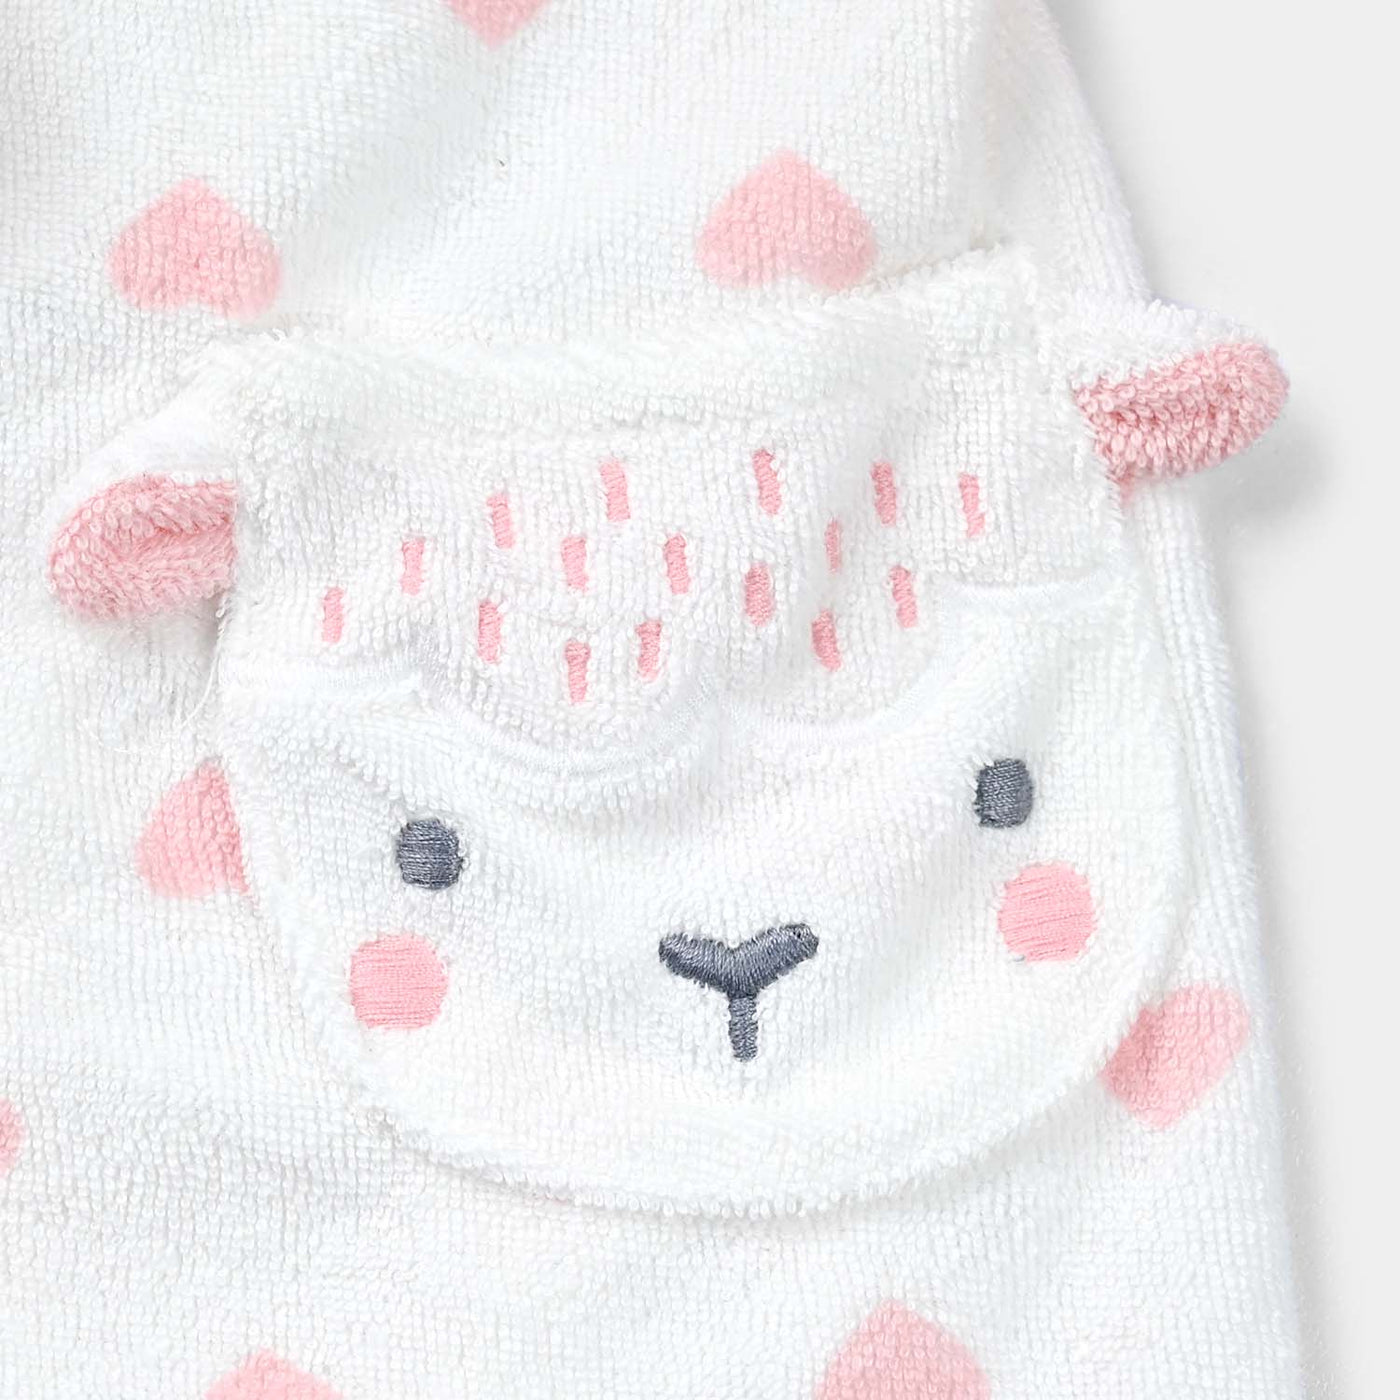 HOODED BABY BATH GOWN